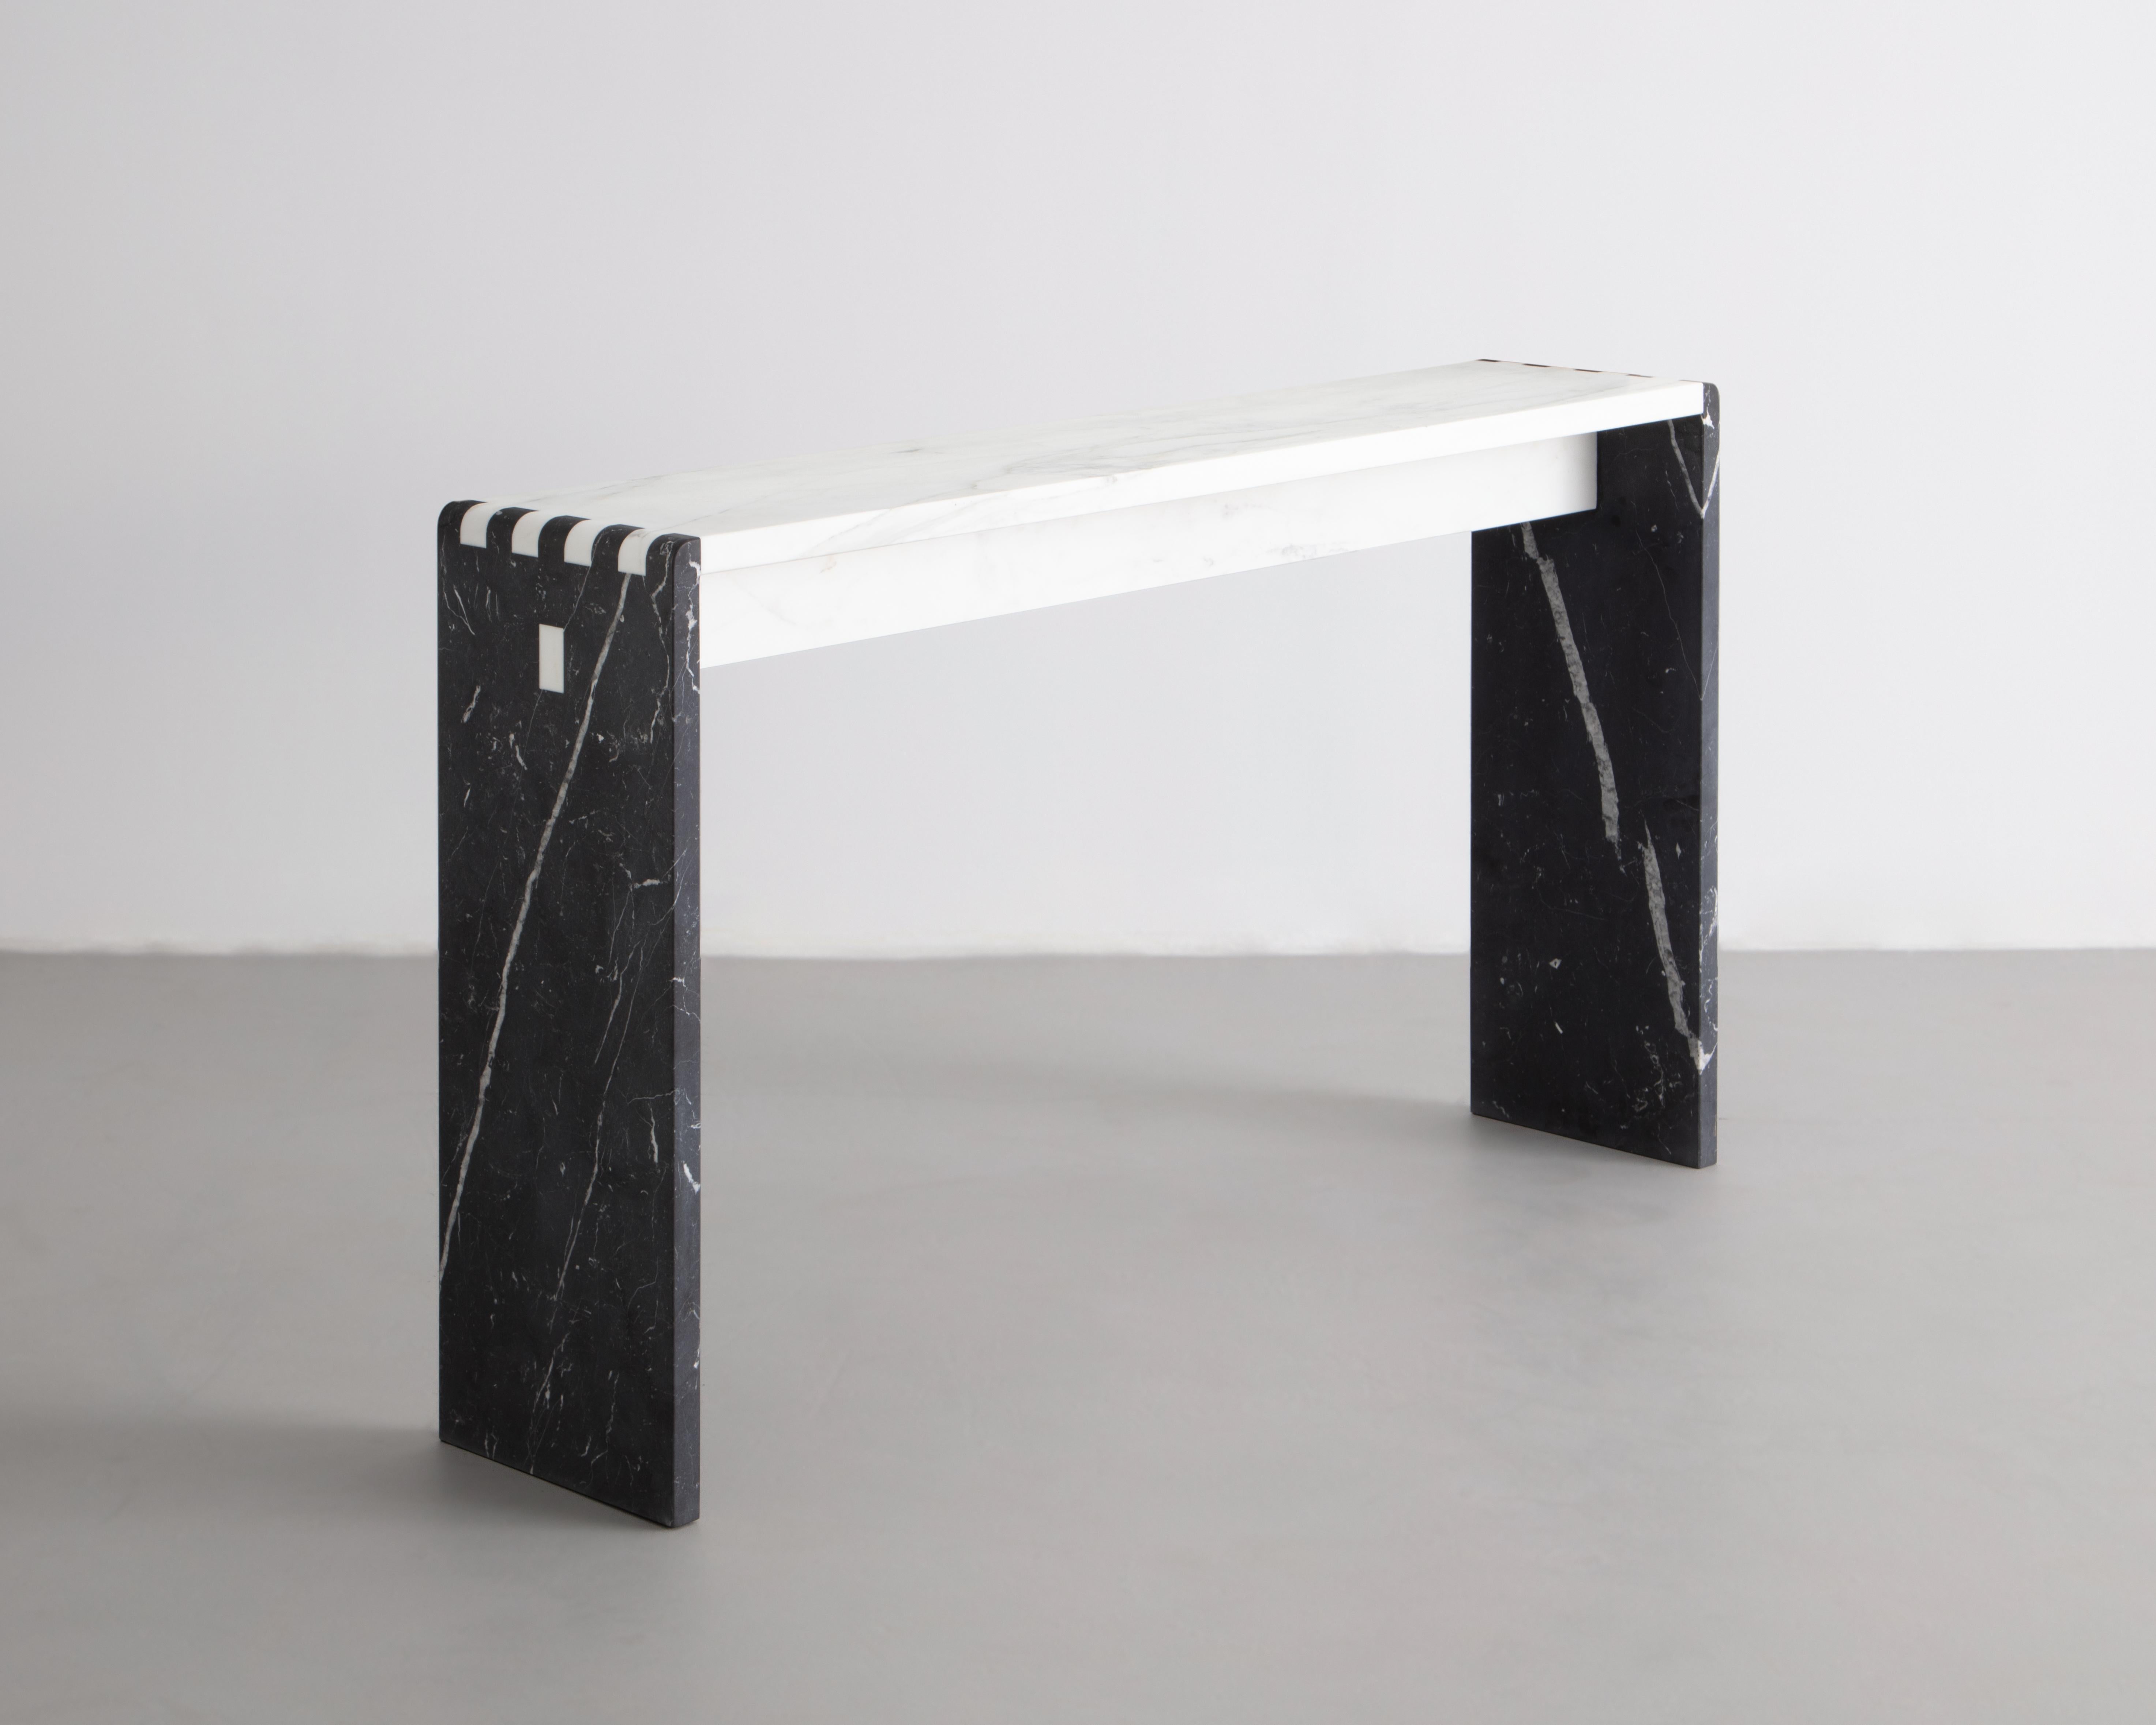 Inspired by traditional Japanese wood joinery, this minimalist Console table is a material study of stone. Shown in Calacatta Gold & Nero Marquina Marble. Perfect for and entryway table or Console.